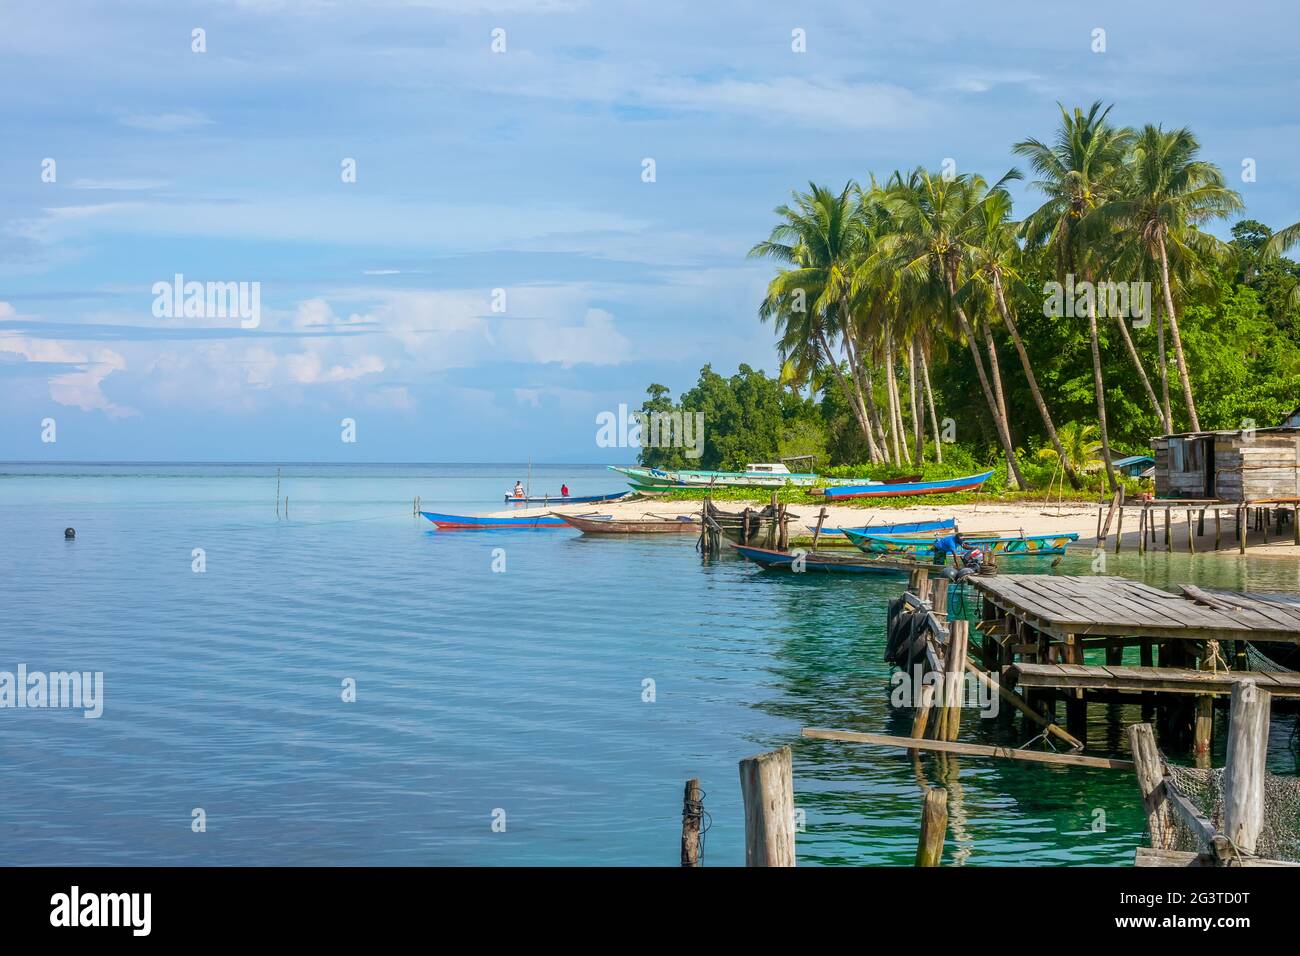 Old Pier and Boats at the Edge of a Tropical Village Stock Photo